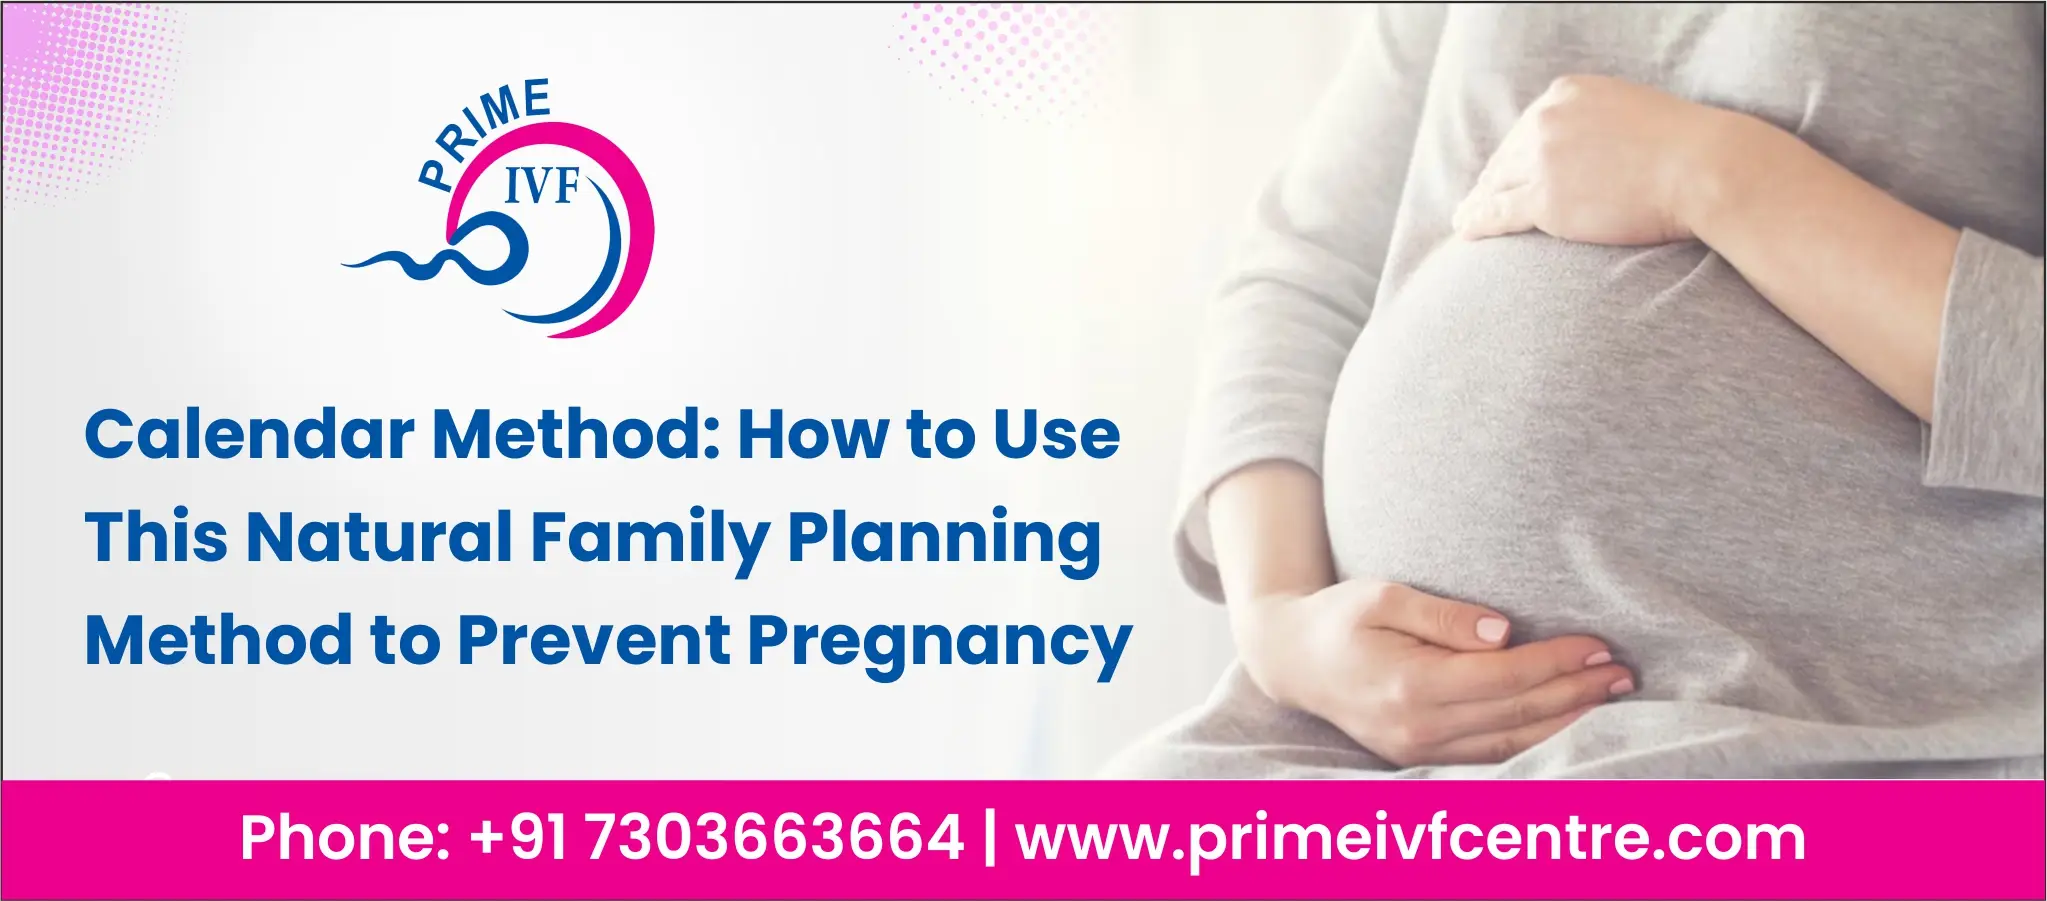 How to Use Calendar Method to Prevent Pregnancy